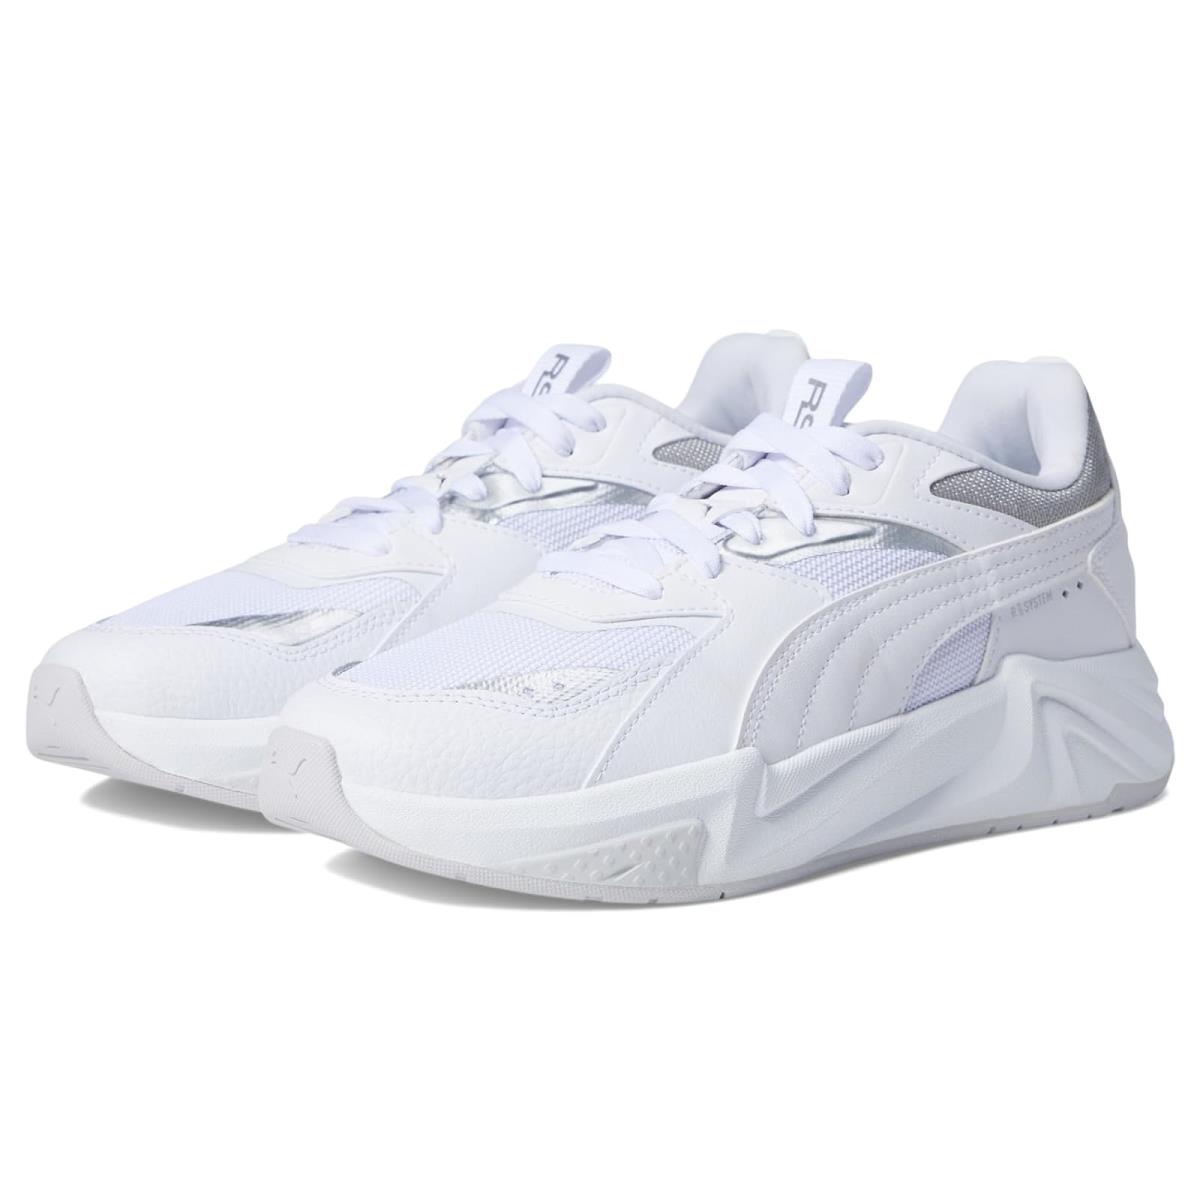 Woman`s Sneakers Athletic Shoes Puma Rs-pulsoid Metallic Puma White